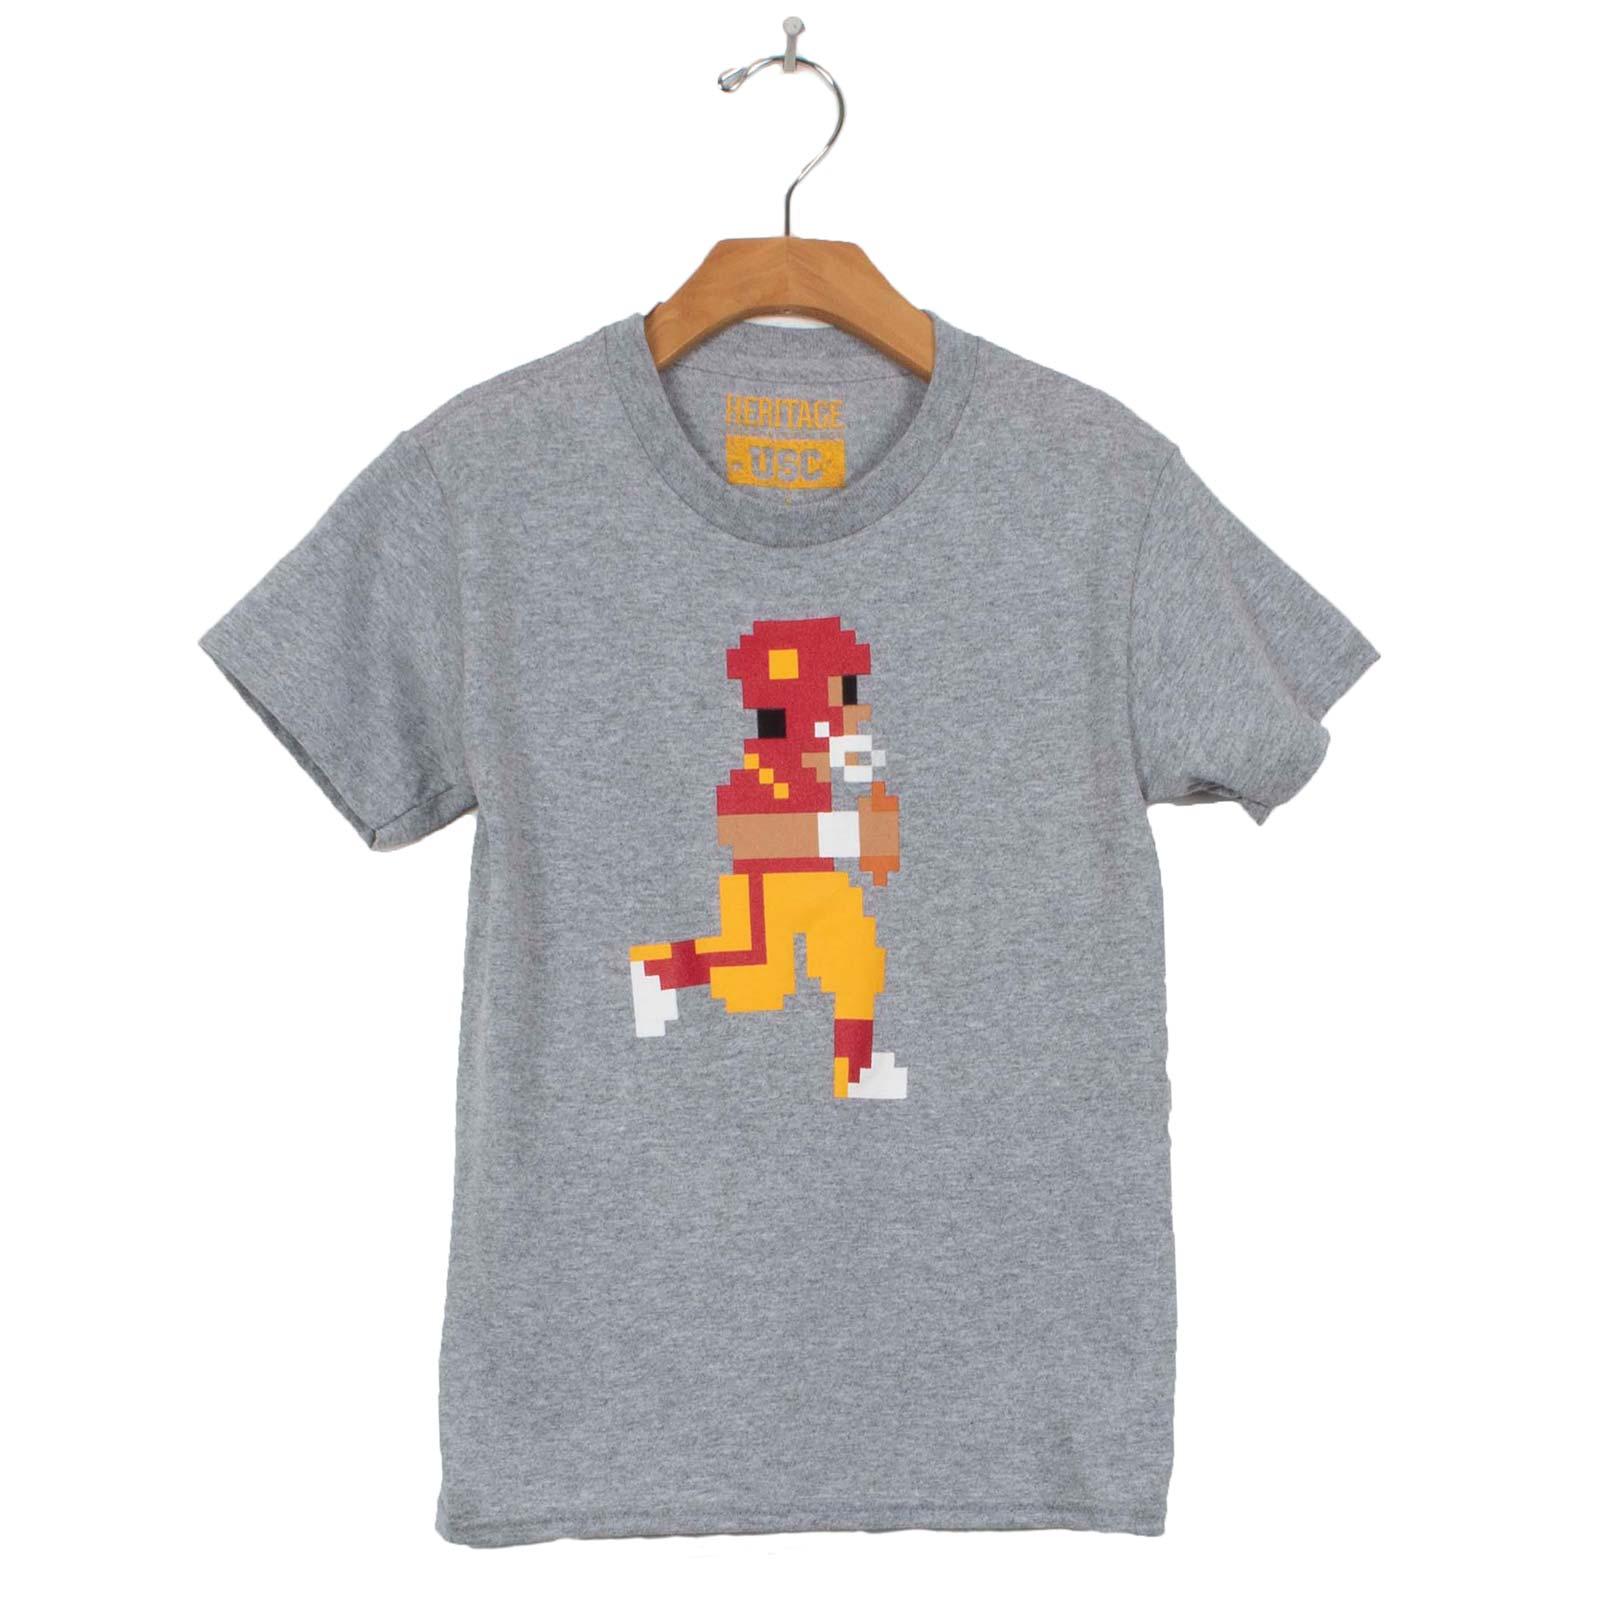 USC 8Bit Football Player Youth SS Tee image01